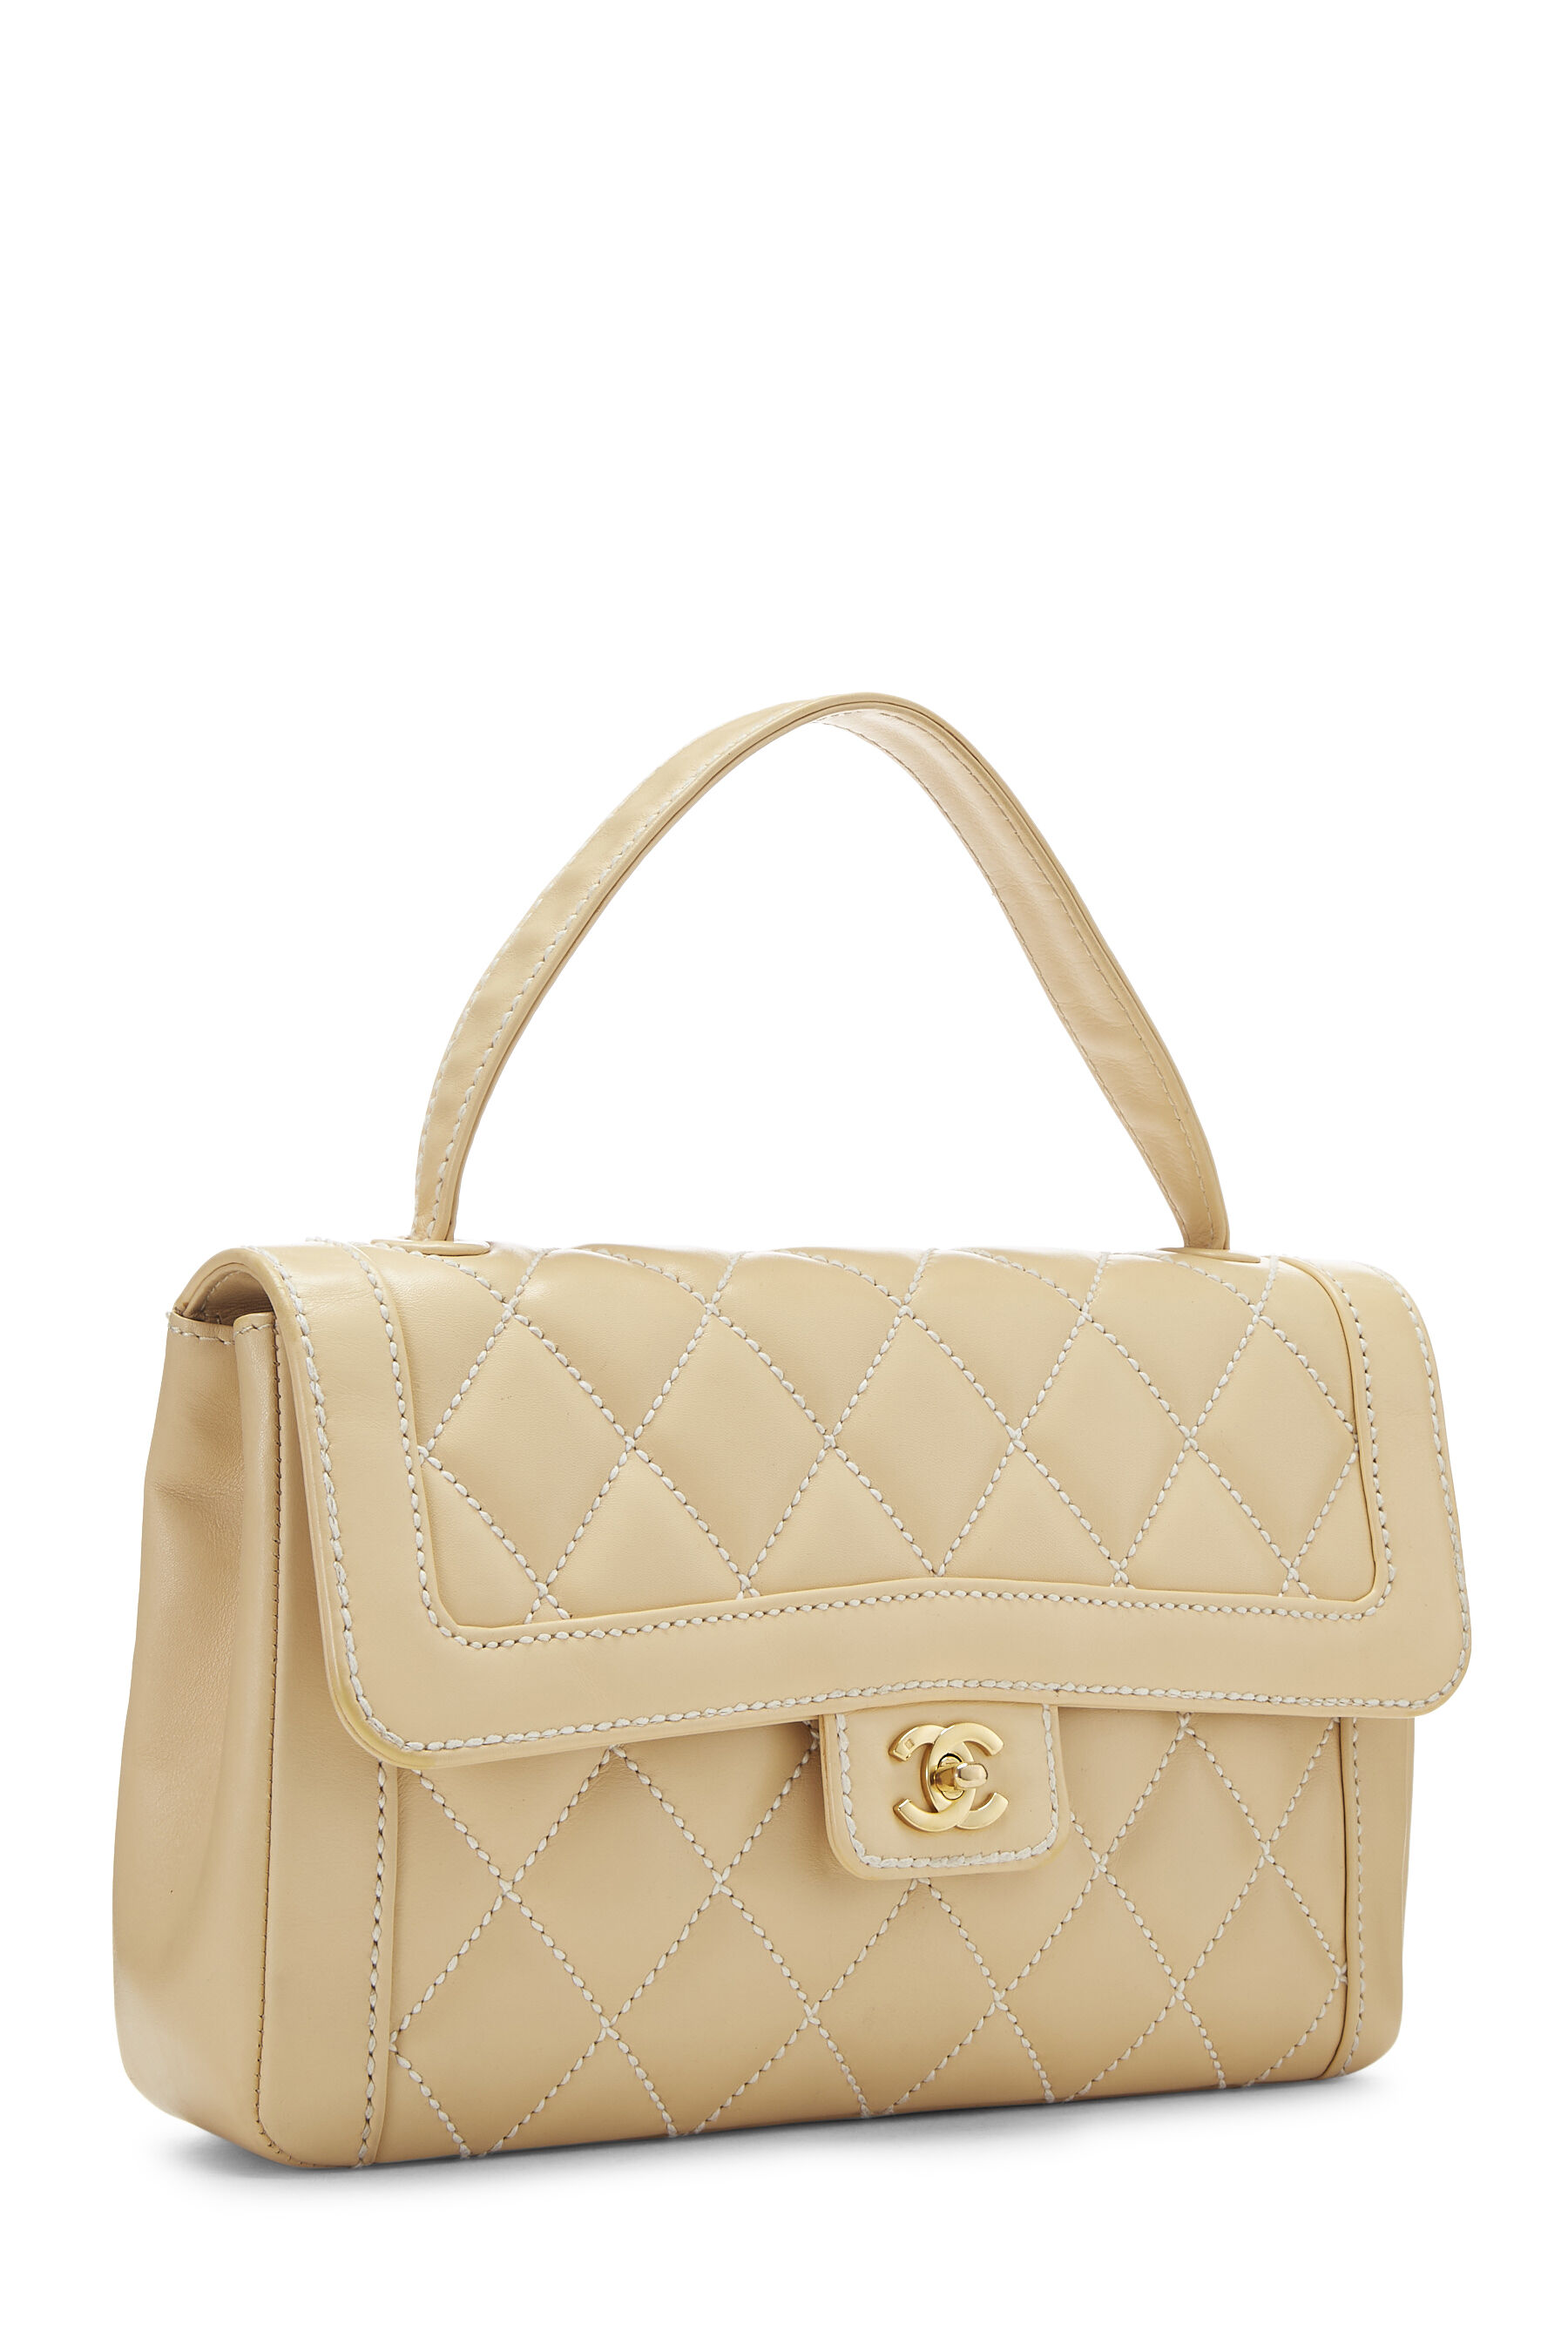 White Top Handle Boston in Wild Stitch Leather with Gold Hardware,  2000-2002, The Art of Giving: The Luxury Wish List, 2020